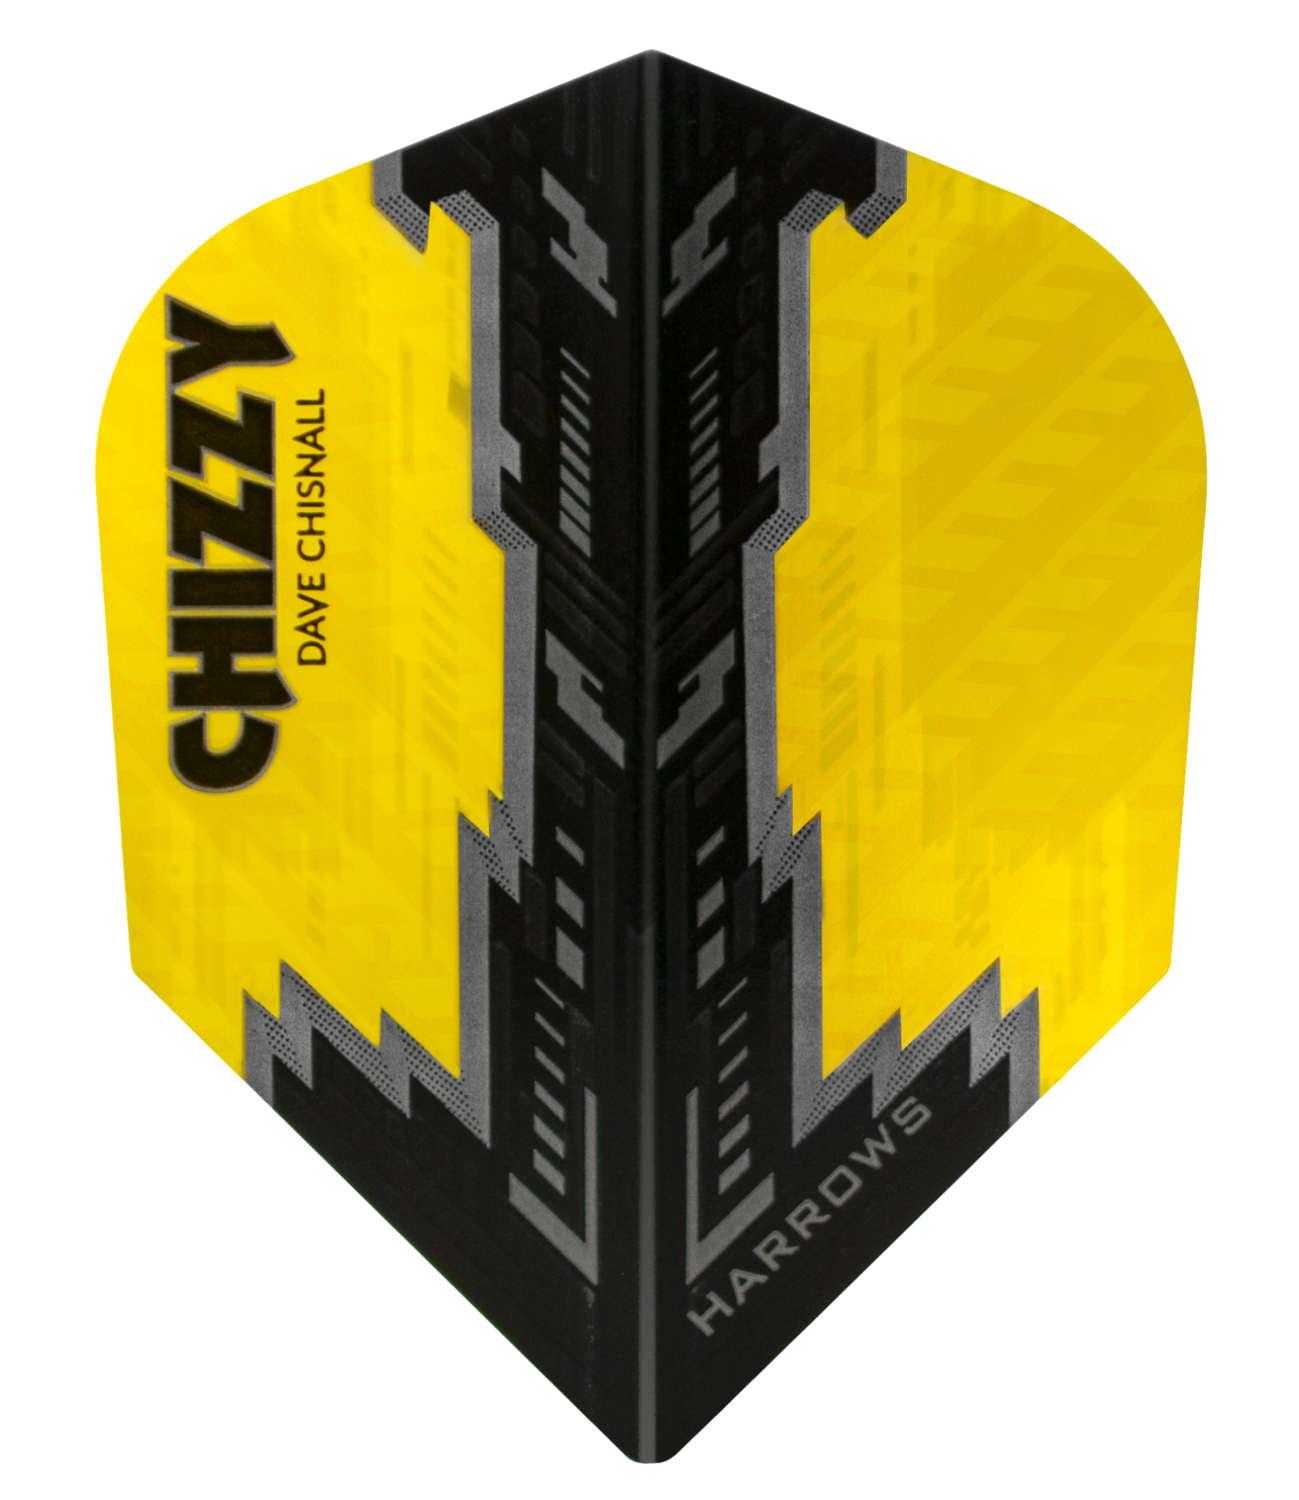 FLIGHT CHIZZY PRIME 7531 Yellow   185334